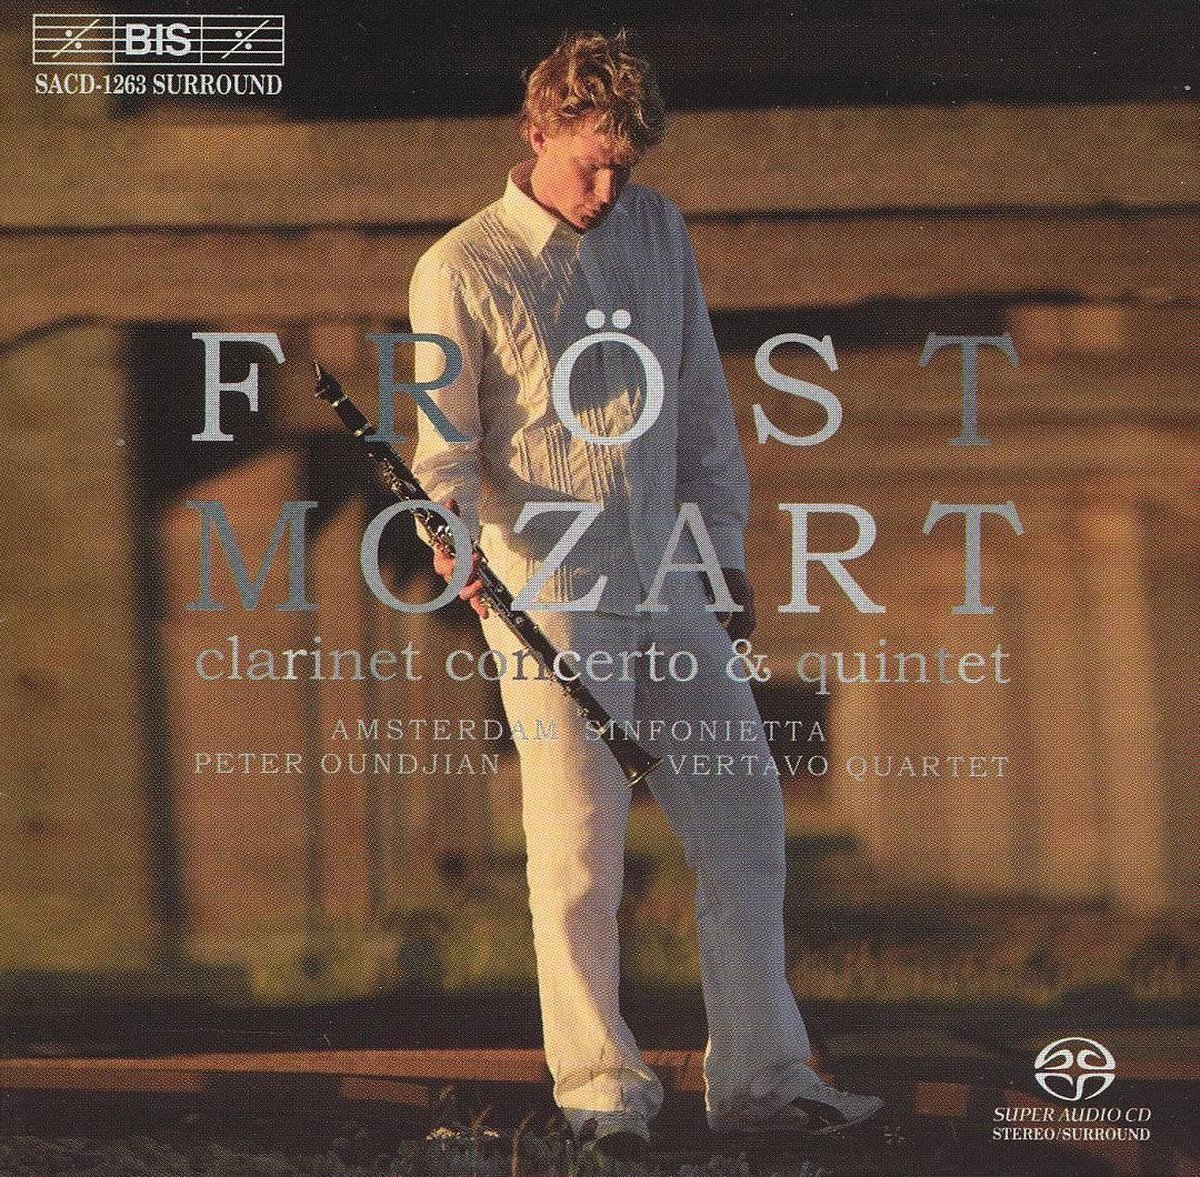 OUTHERE Mozart: Clarinet Concerto, Quintet - Martin Fröst -SACD- (Hybride/Stereo/5.1)